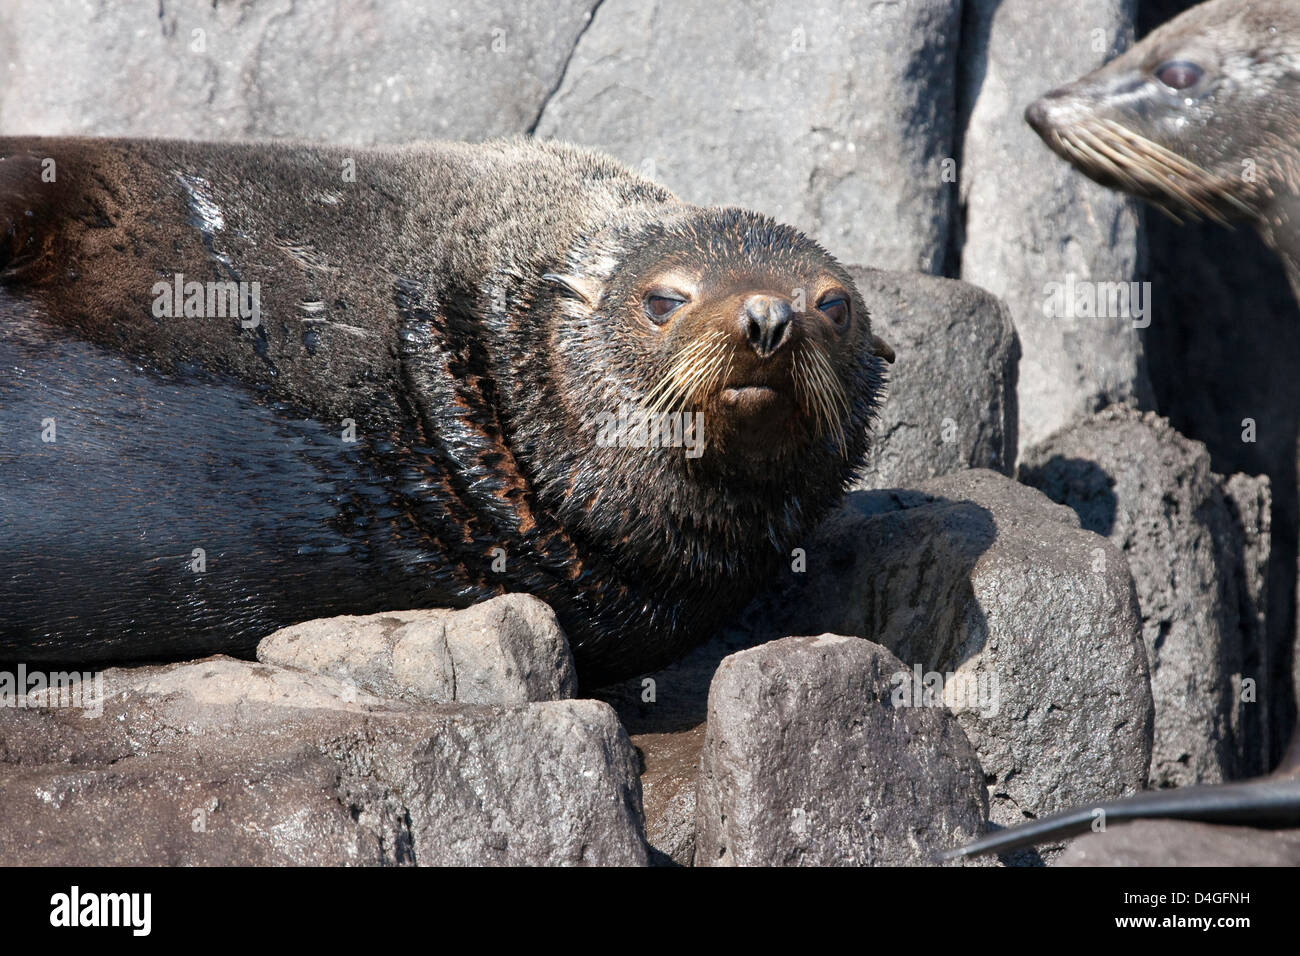 This Guadalupe Fur Seal, Arctocephalus townsendi, was photographed on the rocky coastline of Guadalupe Island, Mexico. Stock Photo